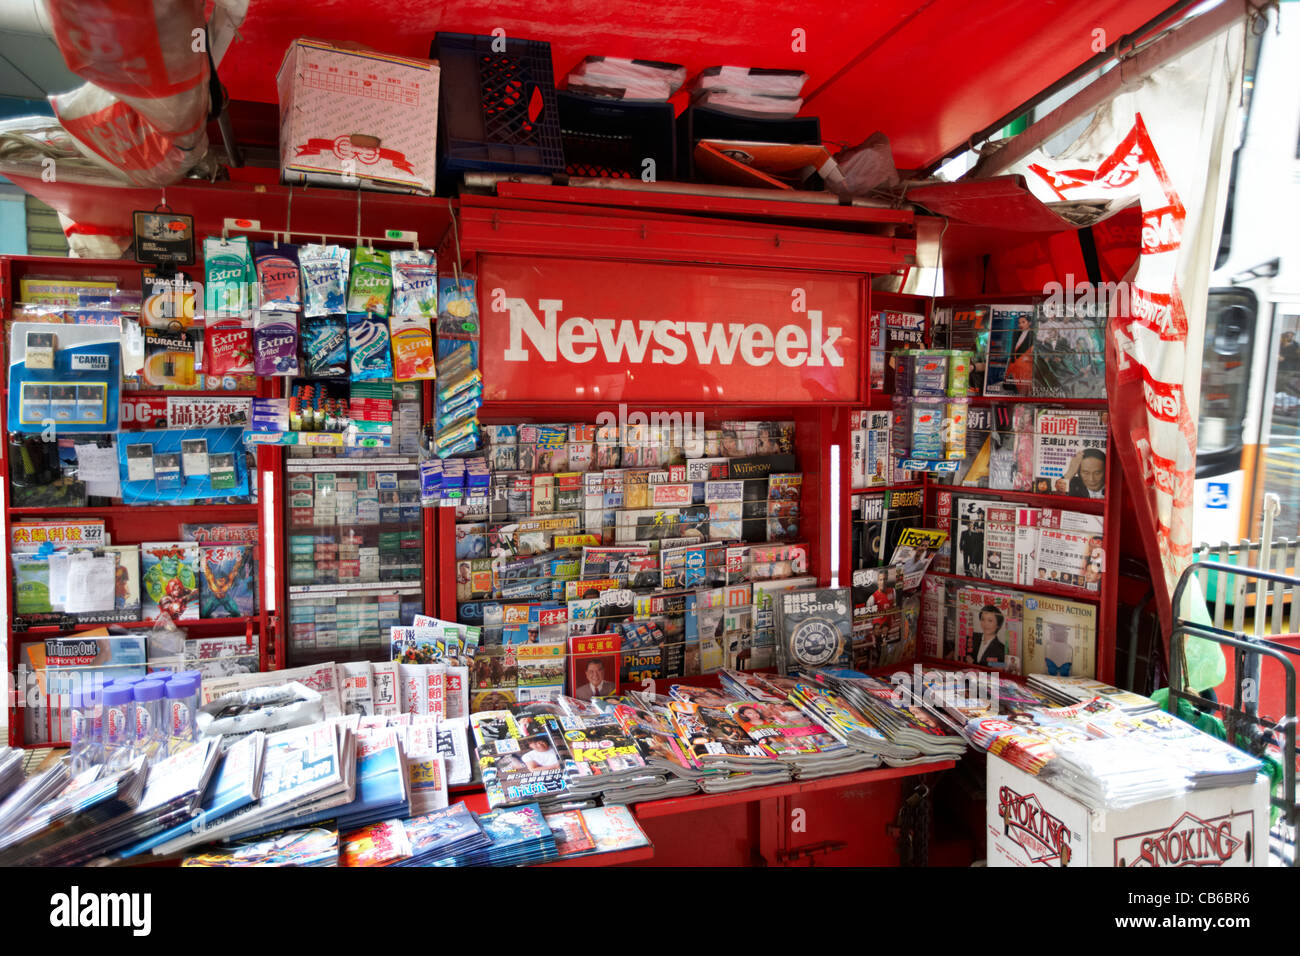 Newsweek giornale stand di stallo in downtown central district, isola di Hong kong, RAS di Hong Kong, Cina Foto Stock